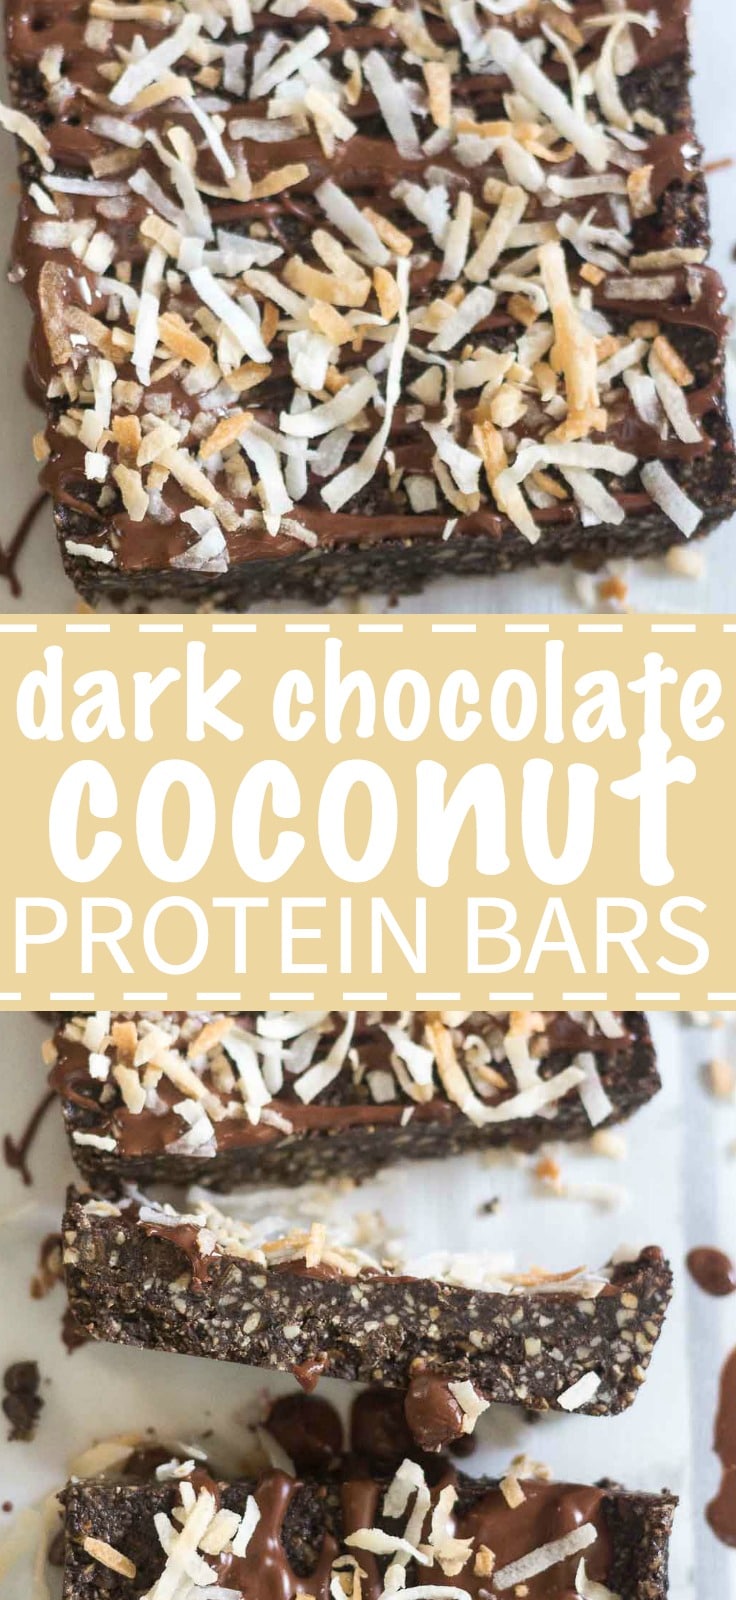 These dark chocolate protein bars are so easy to make in your blender or food processor and they're filled with raw and healthy ingredients. These gluten free protein bars are made with cashews, dark chocolate and filled with protein and coconut.